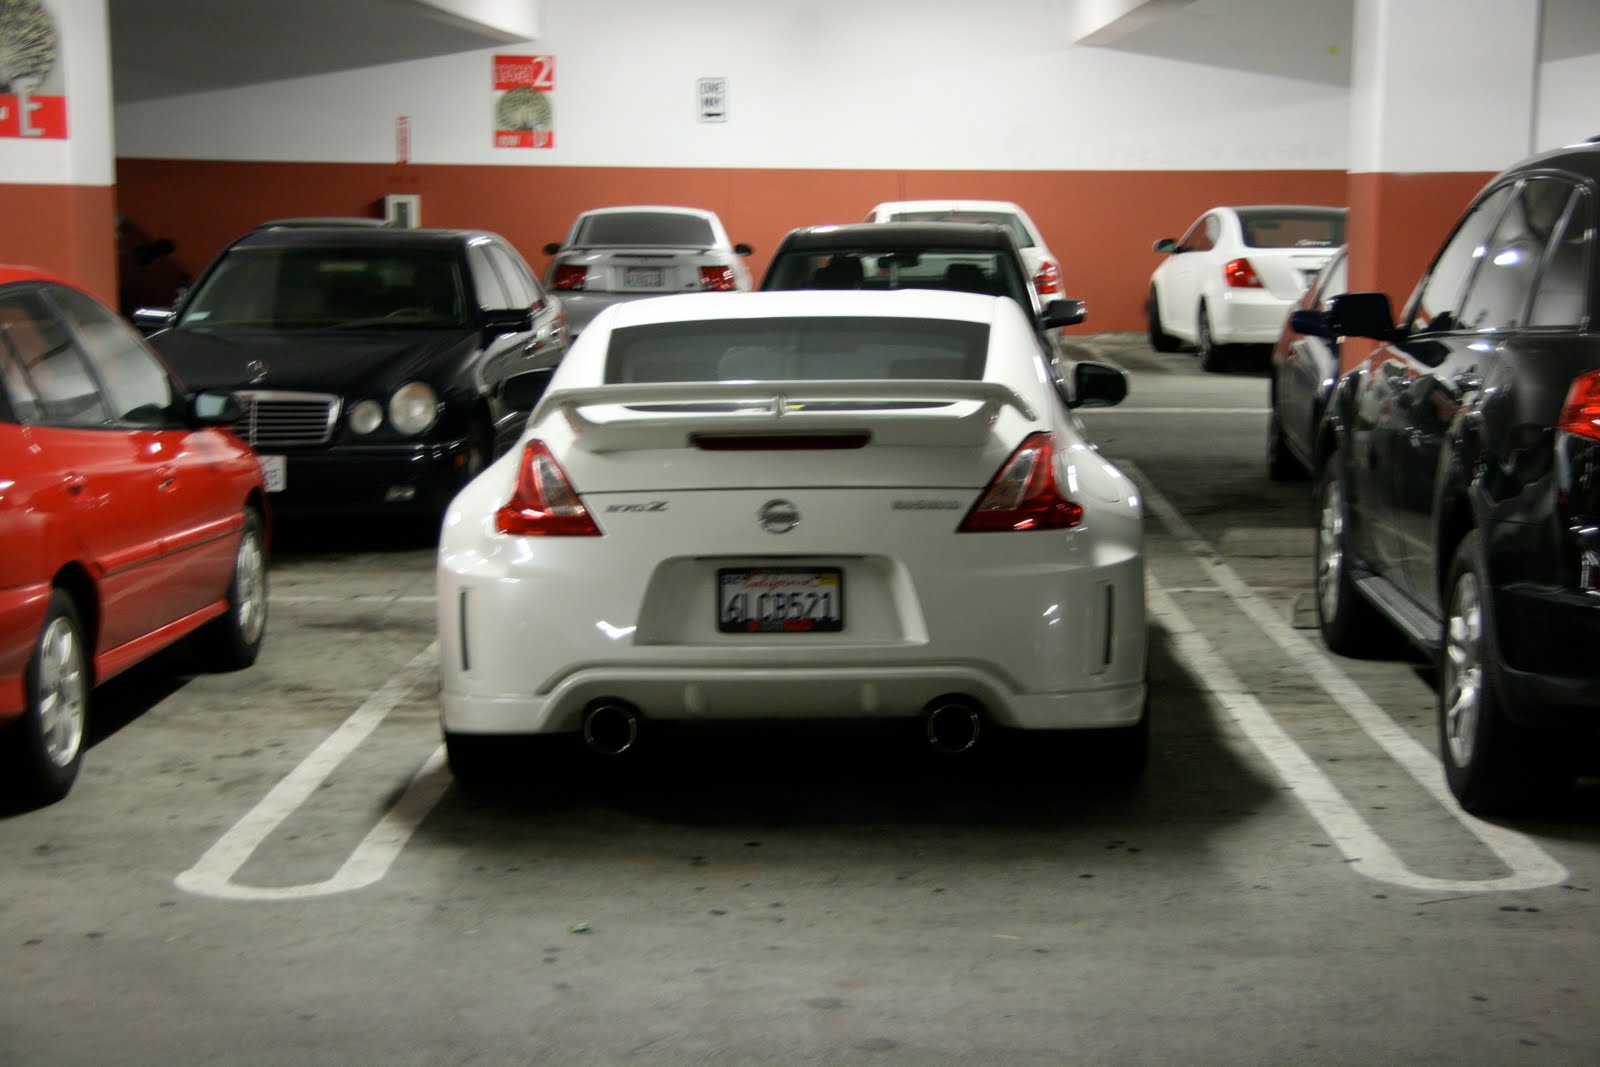 saw the Nismo 370Z in the